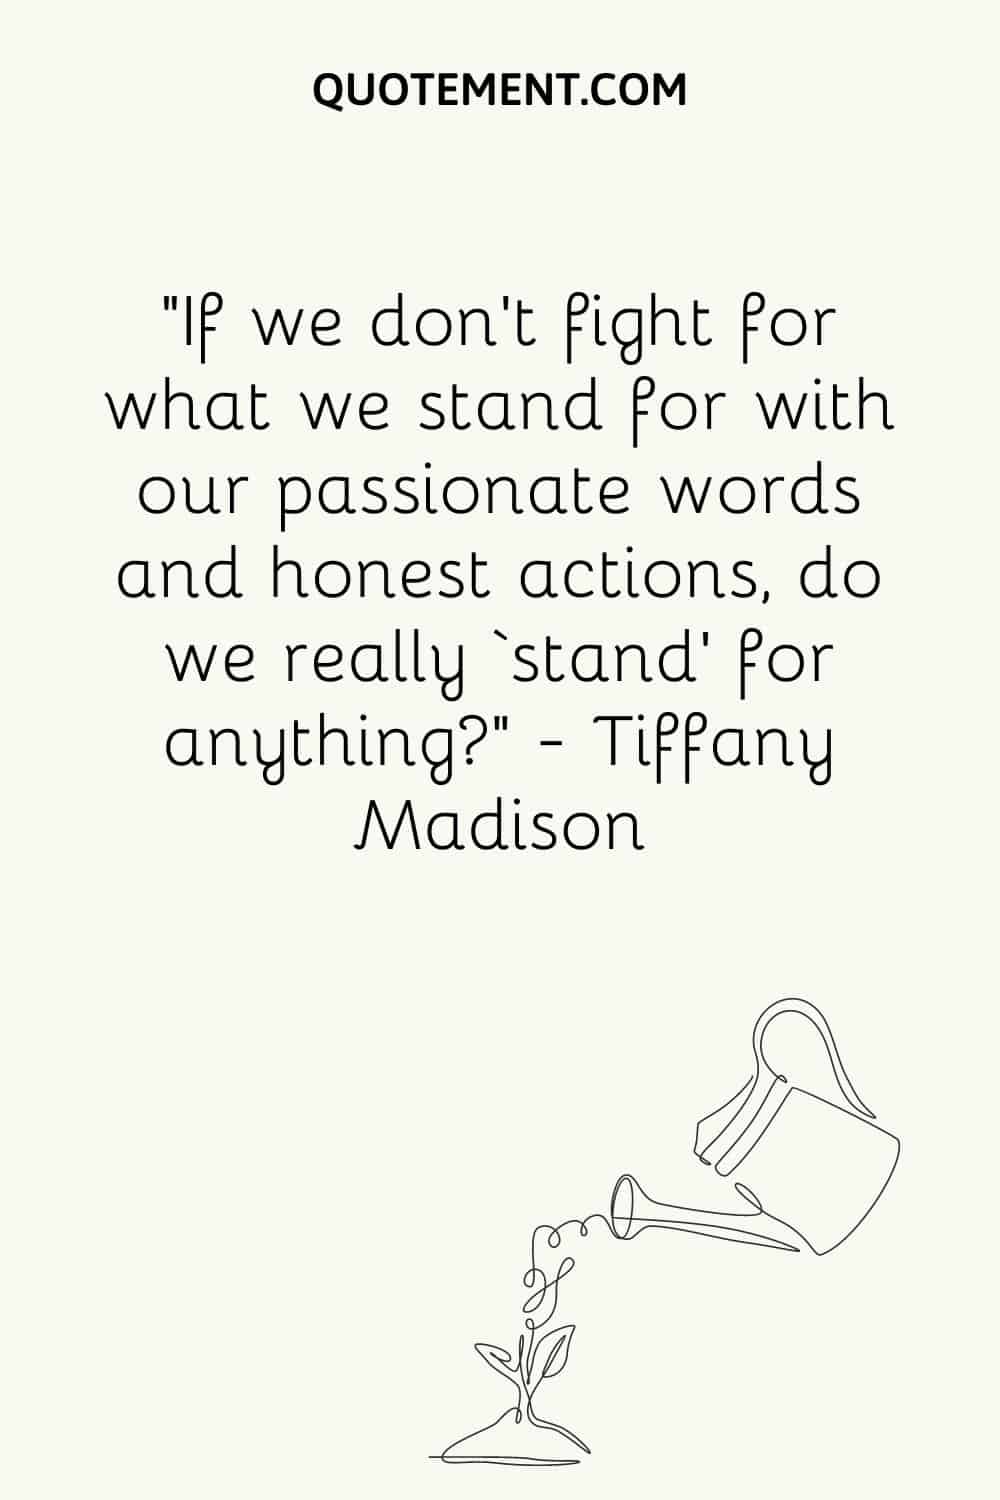 If we don’t fight for what we stand for with our passionate words and honest actions, do we really ‘stand’ for anything